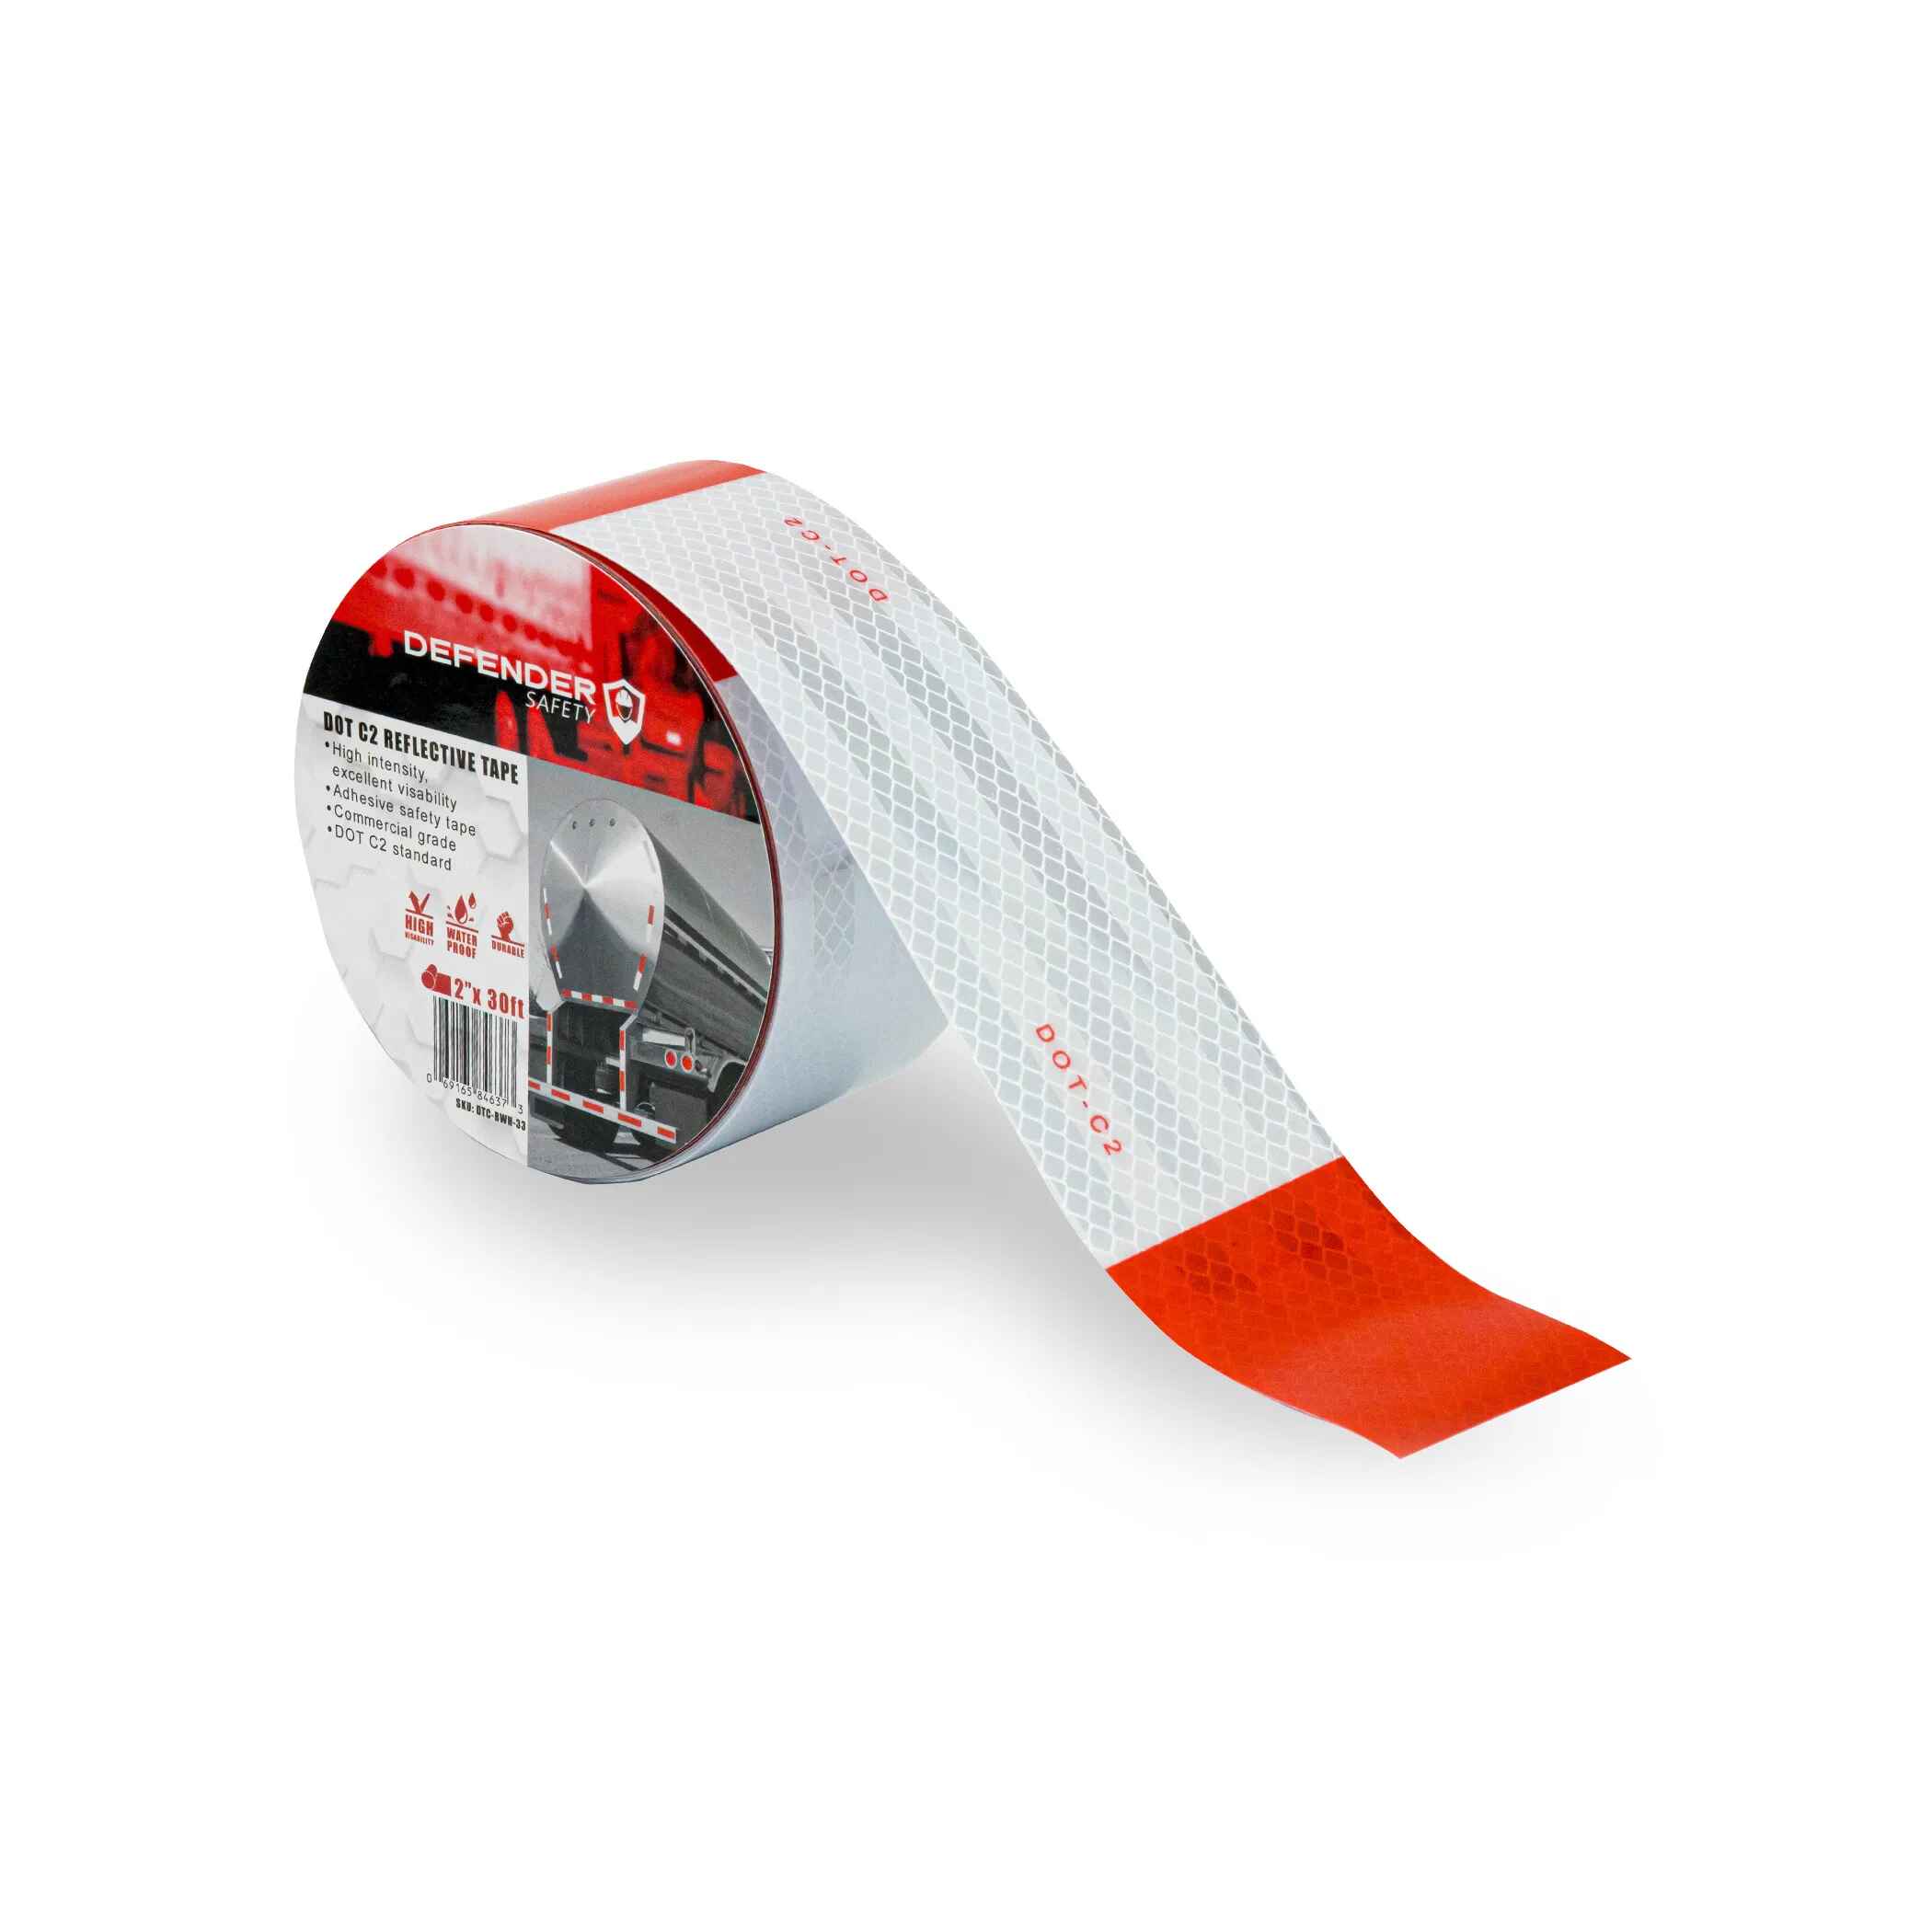 DOT / DOT C2 Reflective Tape Requirements